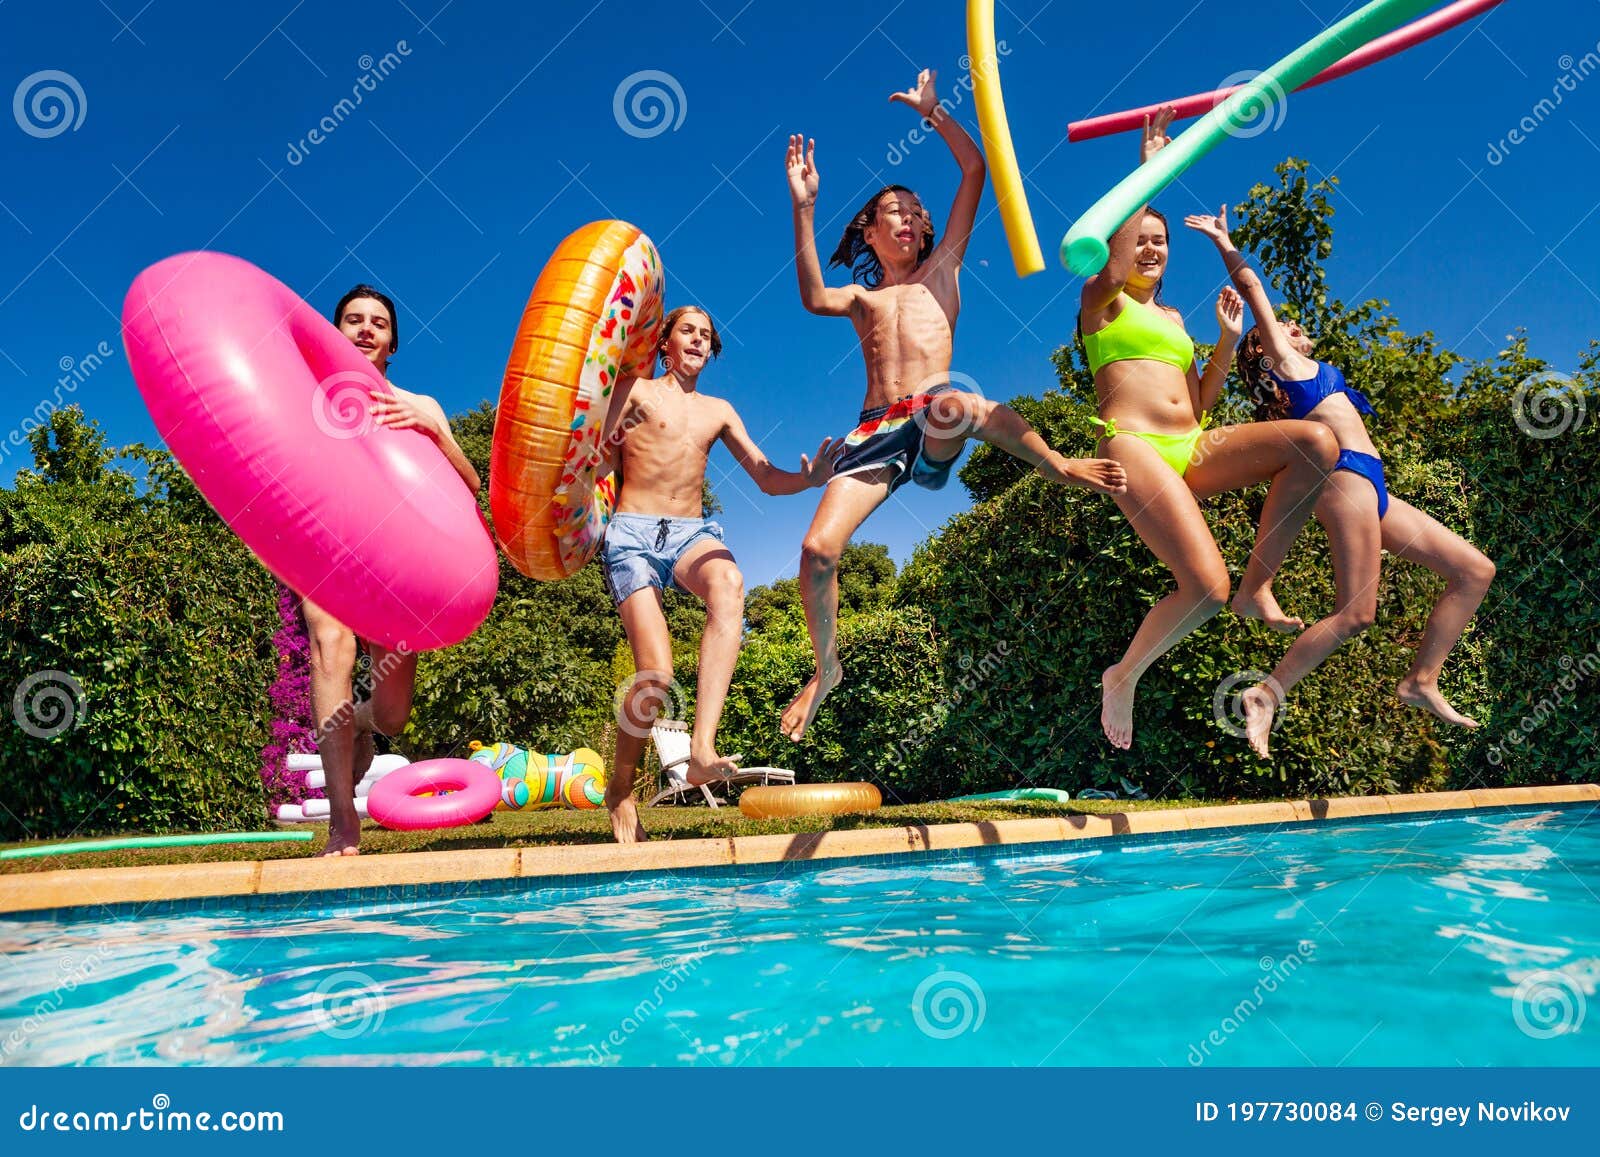 Inflatable Children Blow Up Toys Party Fancy Dress Pool Beach Swimming Kids Play 